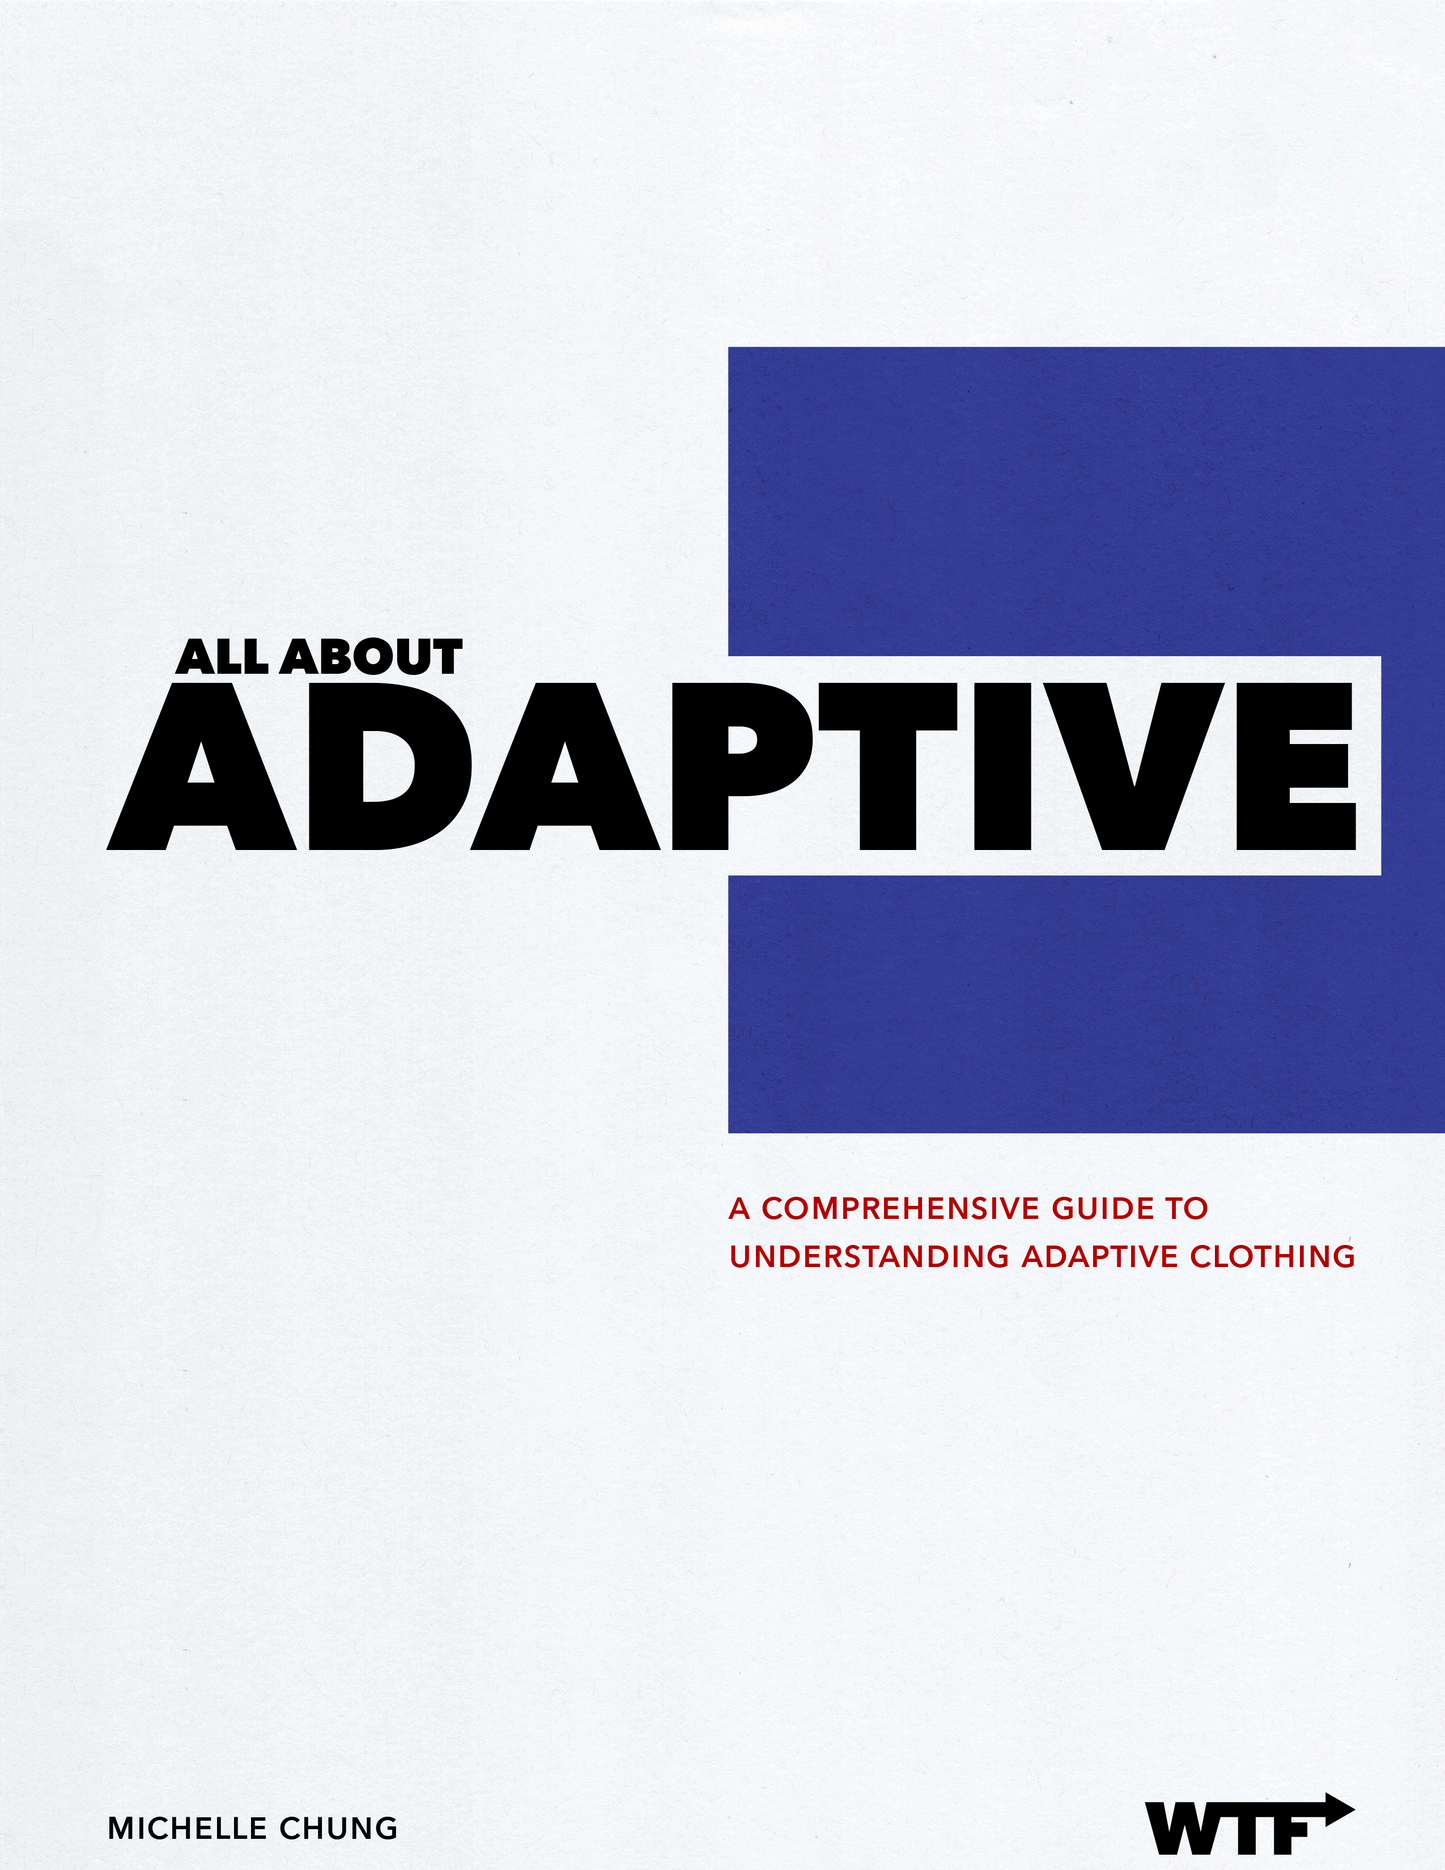 All About Adaptive: A Comprehensive Guide to Understanding Adaptive Clothing